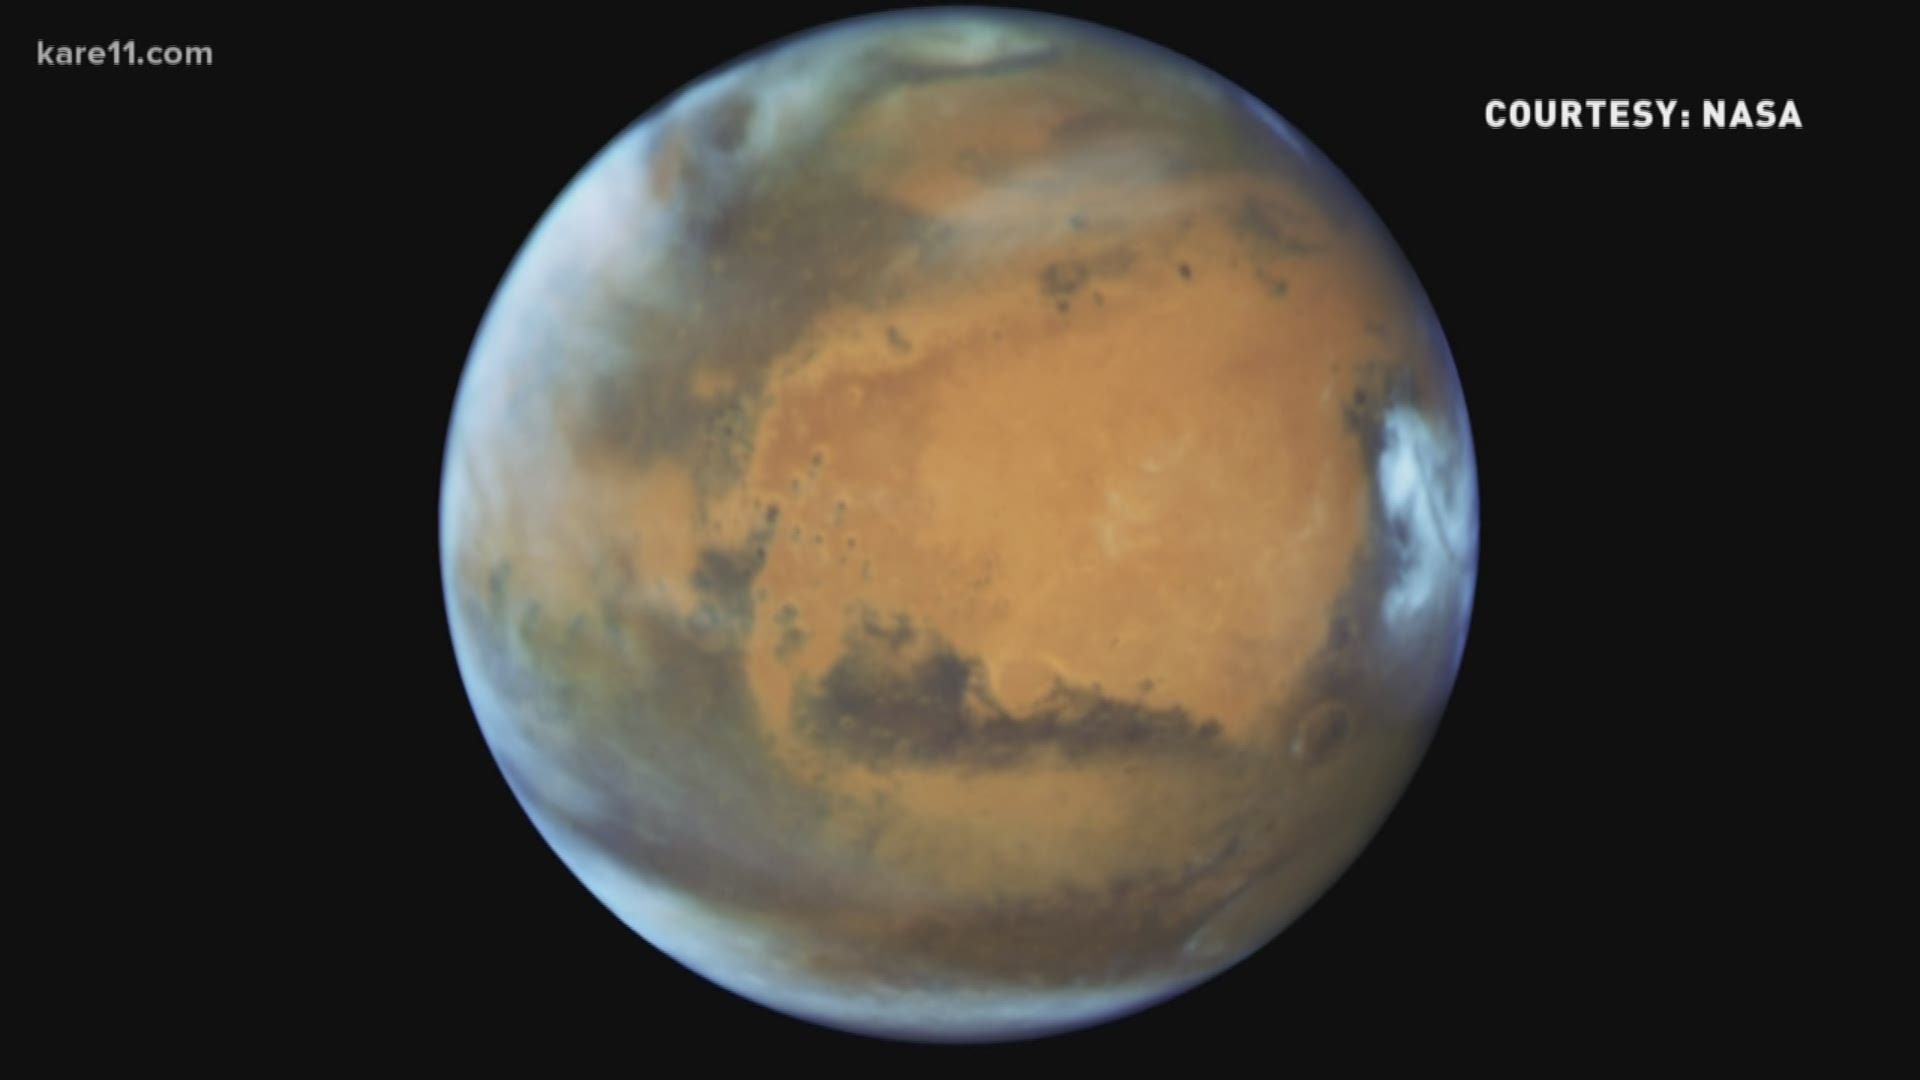 Mars will be 35.8 million miles away from Earth tonight. Believe it or not, that's pretty close. https://kare11.tv/2LDFbuX